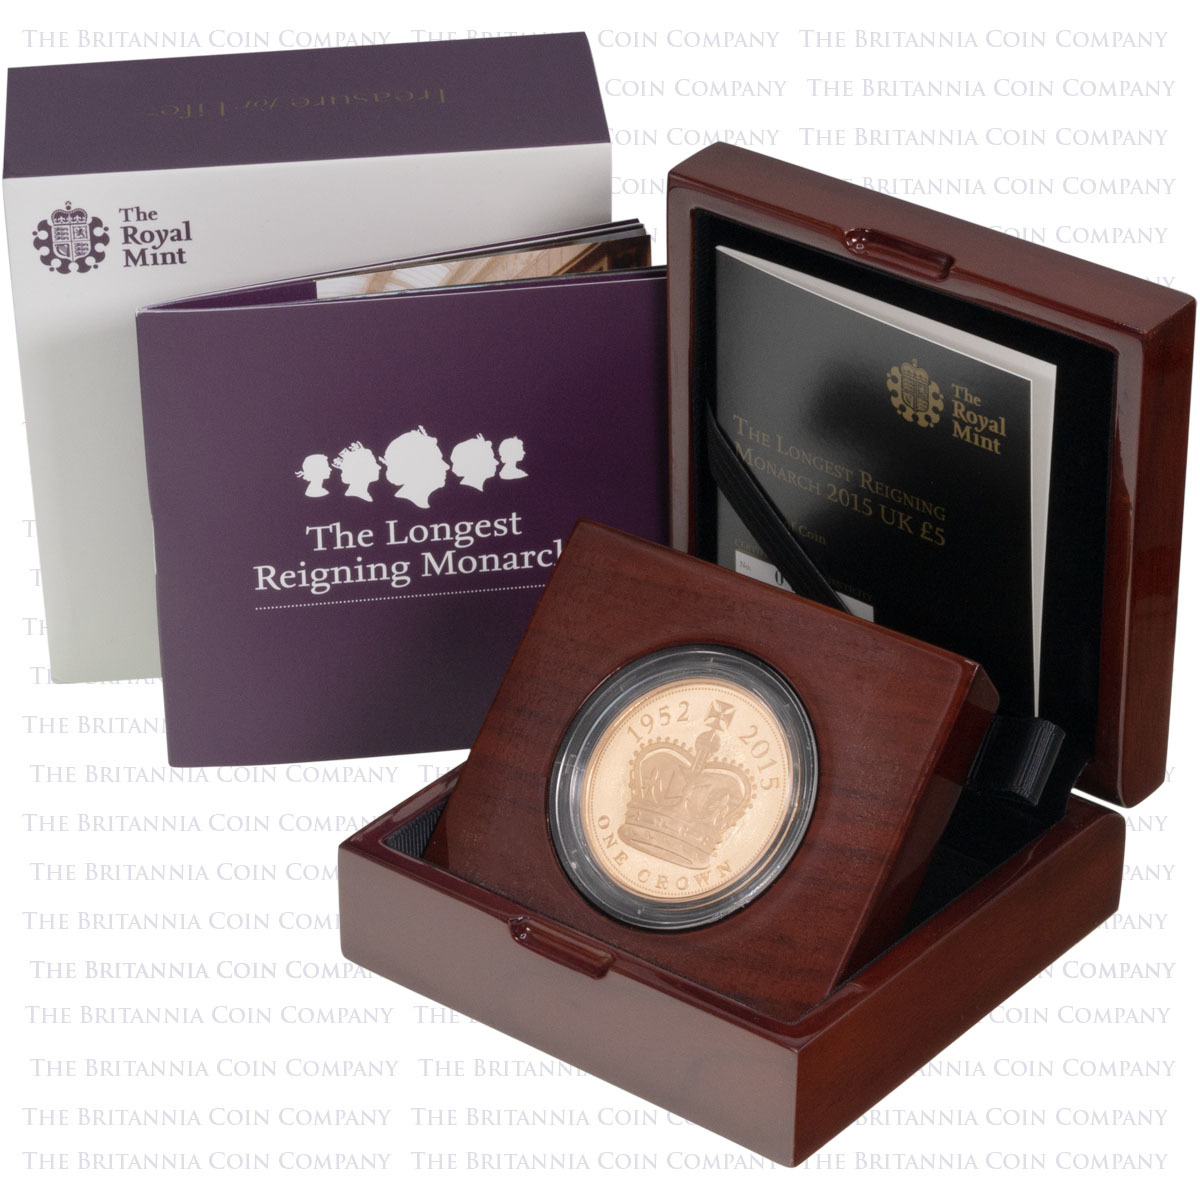 UKLRMGP 2015 Longest Reigning Monarch Five Pound Crown Gold Proof Coin Boxed